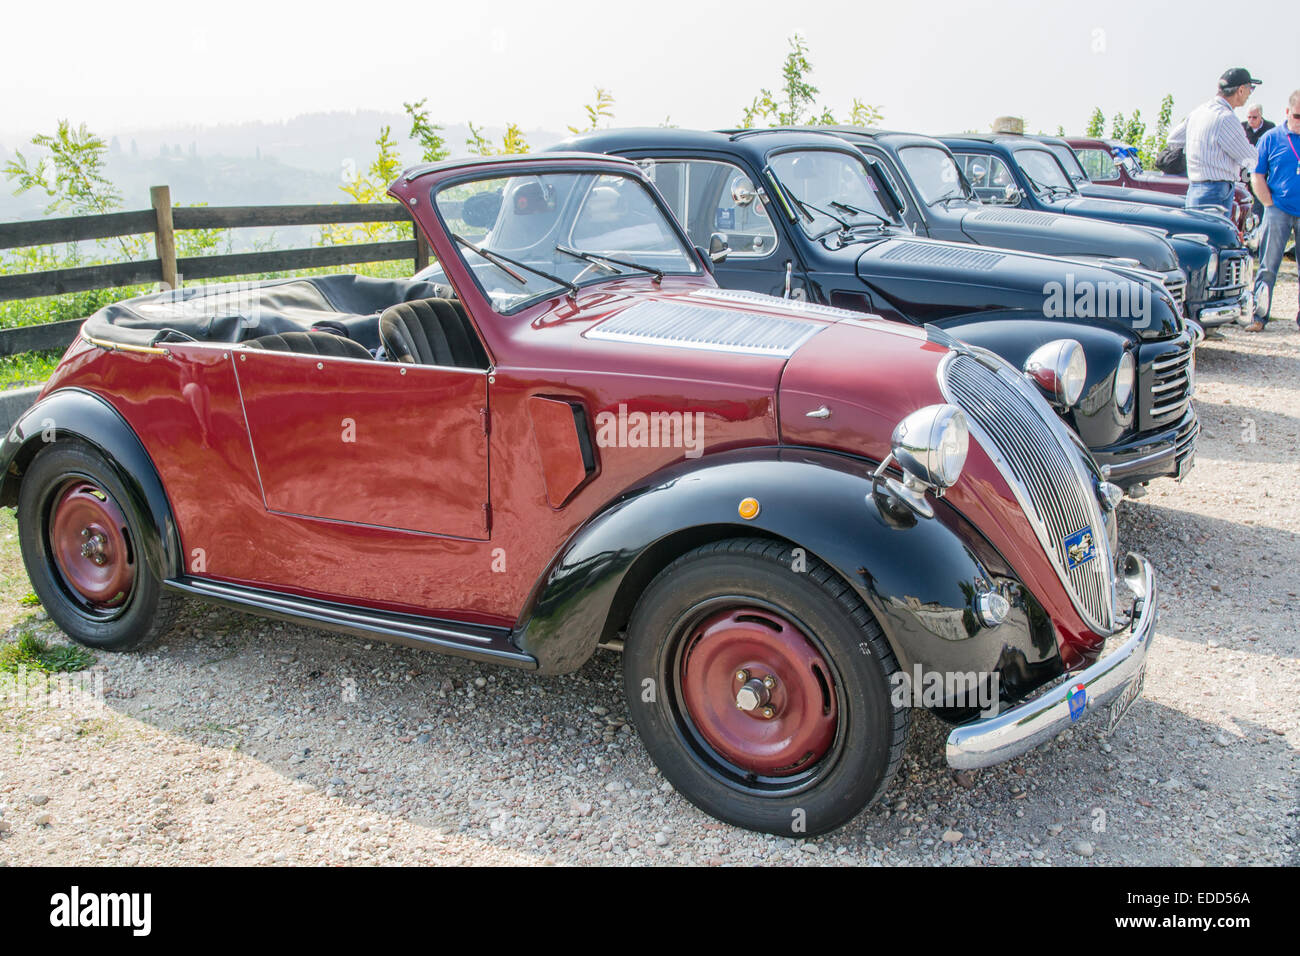 A Fiat Topolino Car High Resolution Stock Photography And Images Alamy